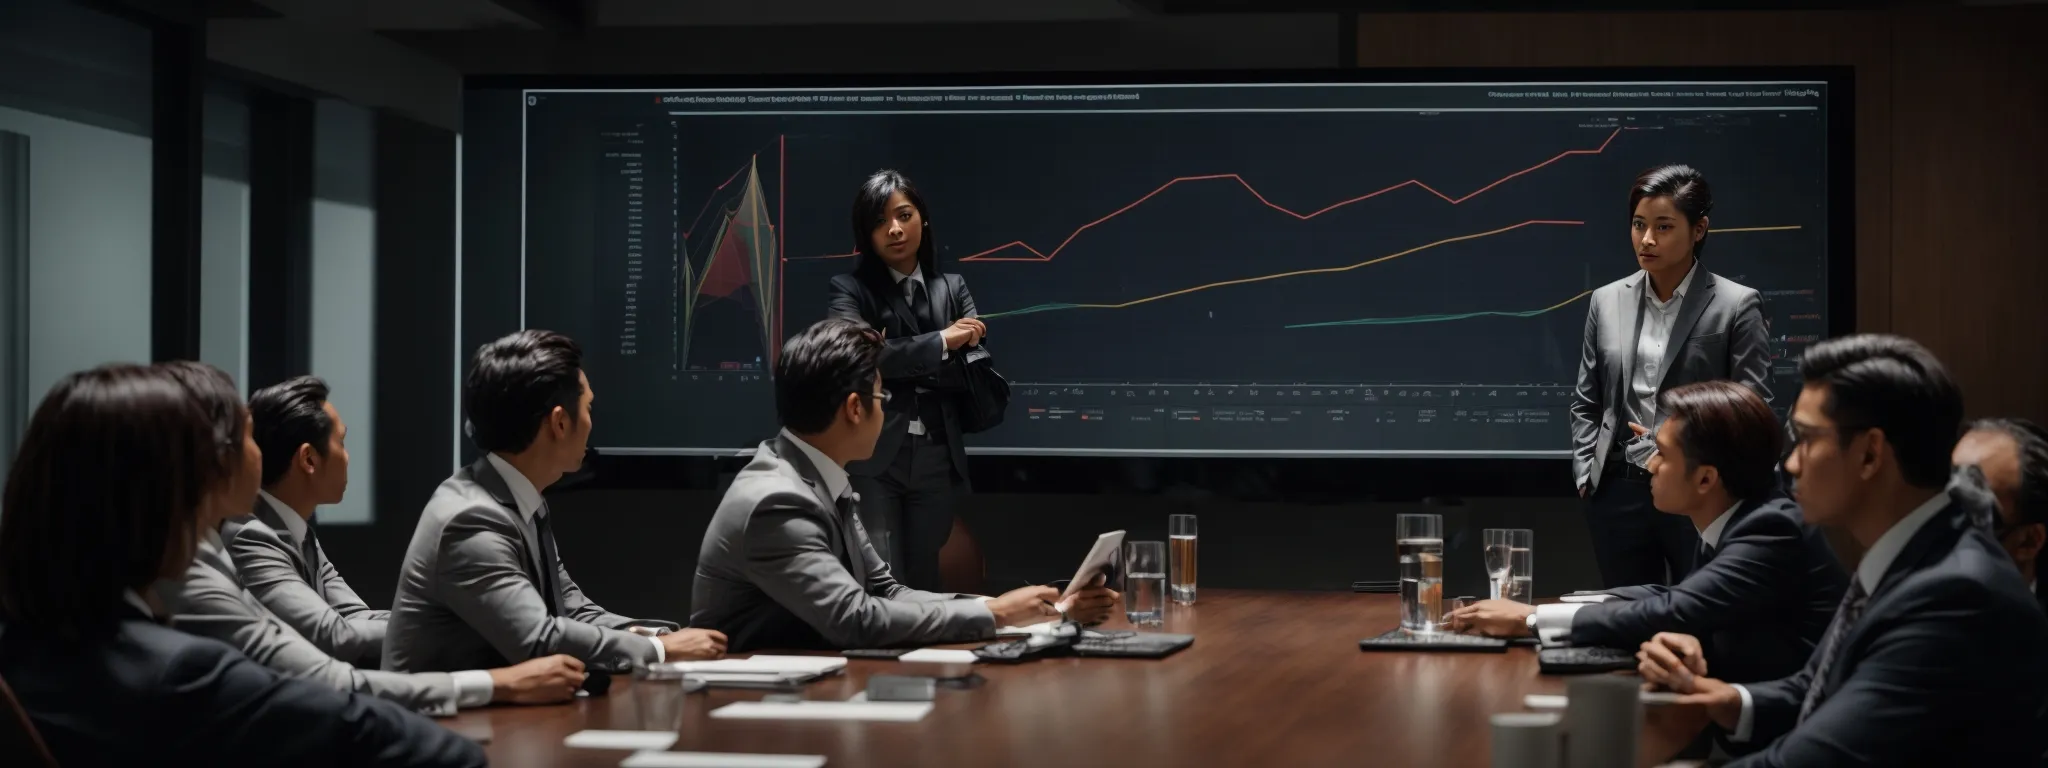 a boardroom with diverse professionals analyzing graphs on a large screen, strategizing targeted marketing approaches.